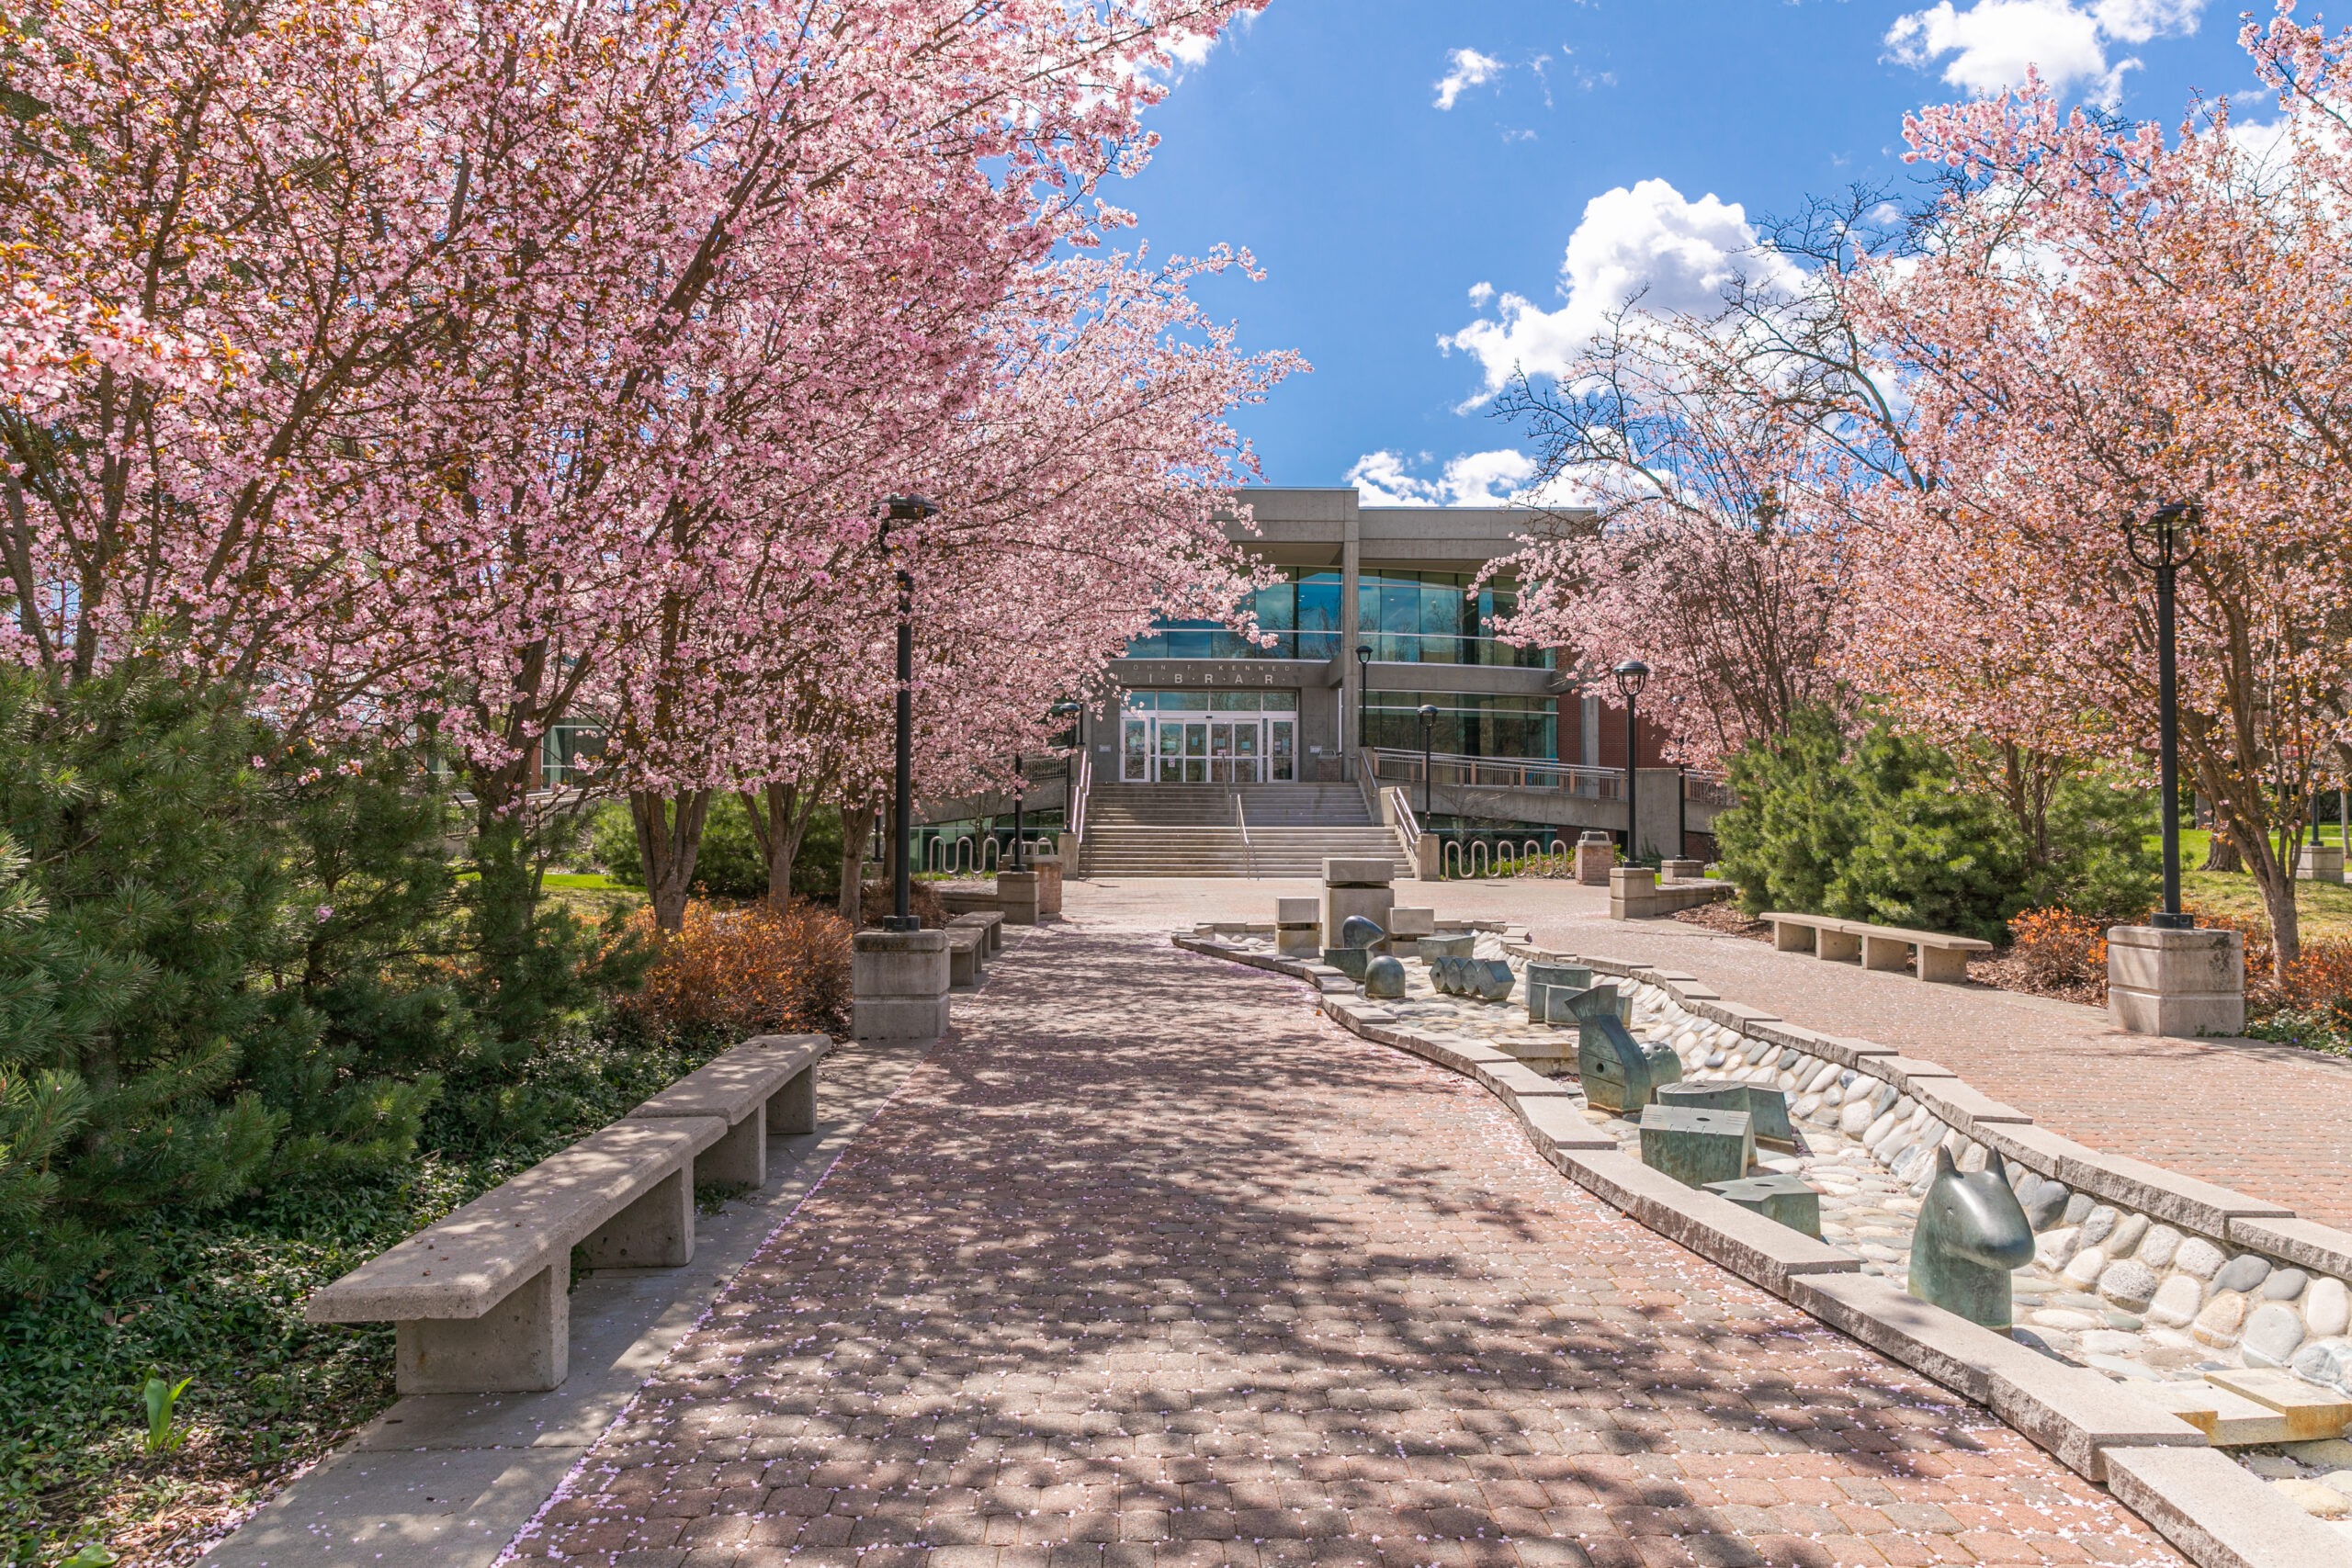 view of campus in the spring with blooming cheri trees.